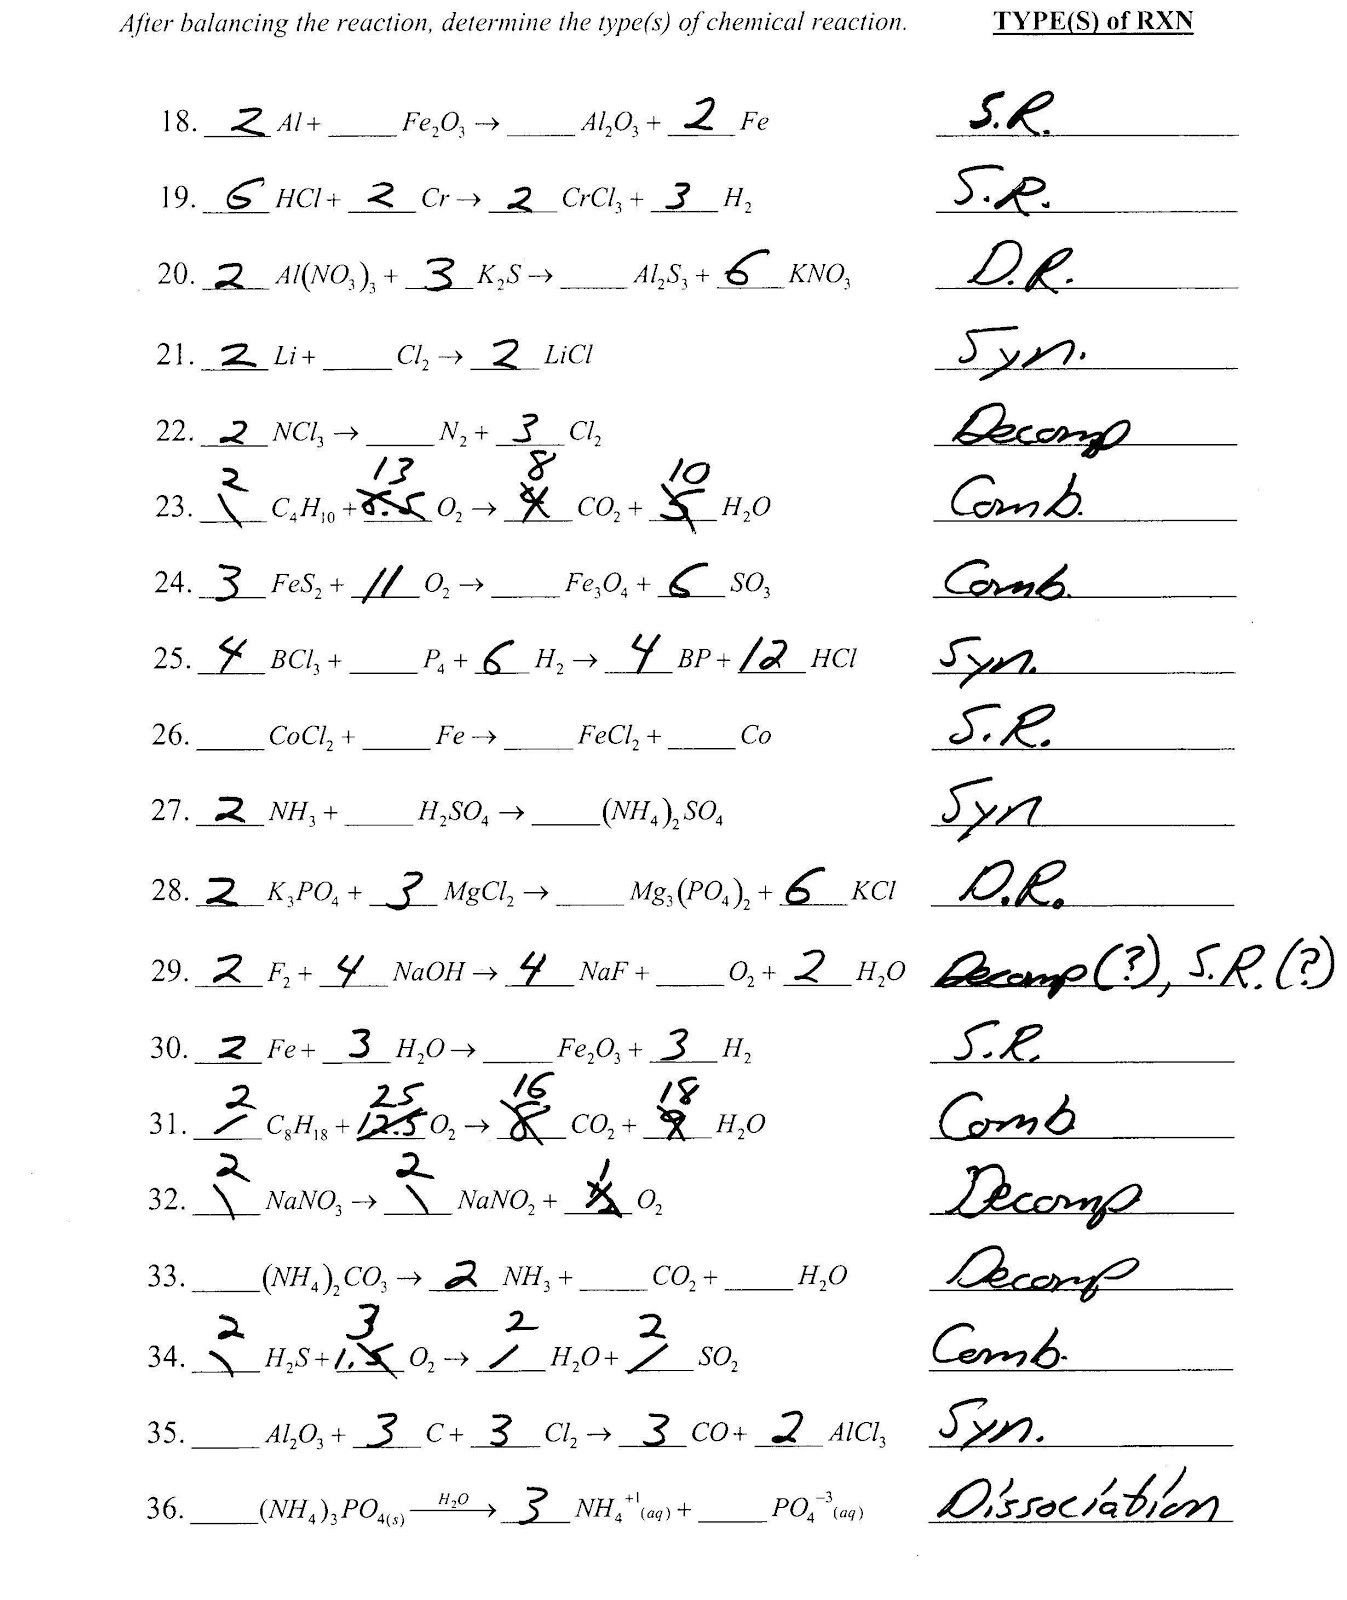 Worksheet 3 Balancing Equations And Identifying Types Of Reactions Intended For Worksheet 3 Balancing Equations And Identifying Types Of Reactions Answers